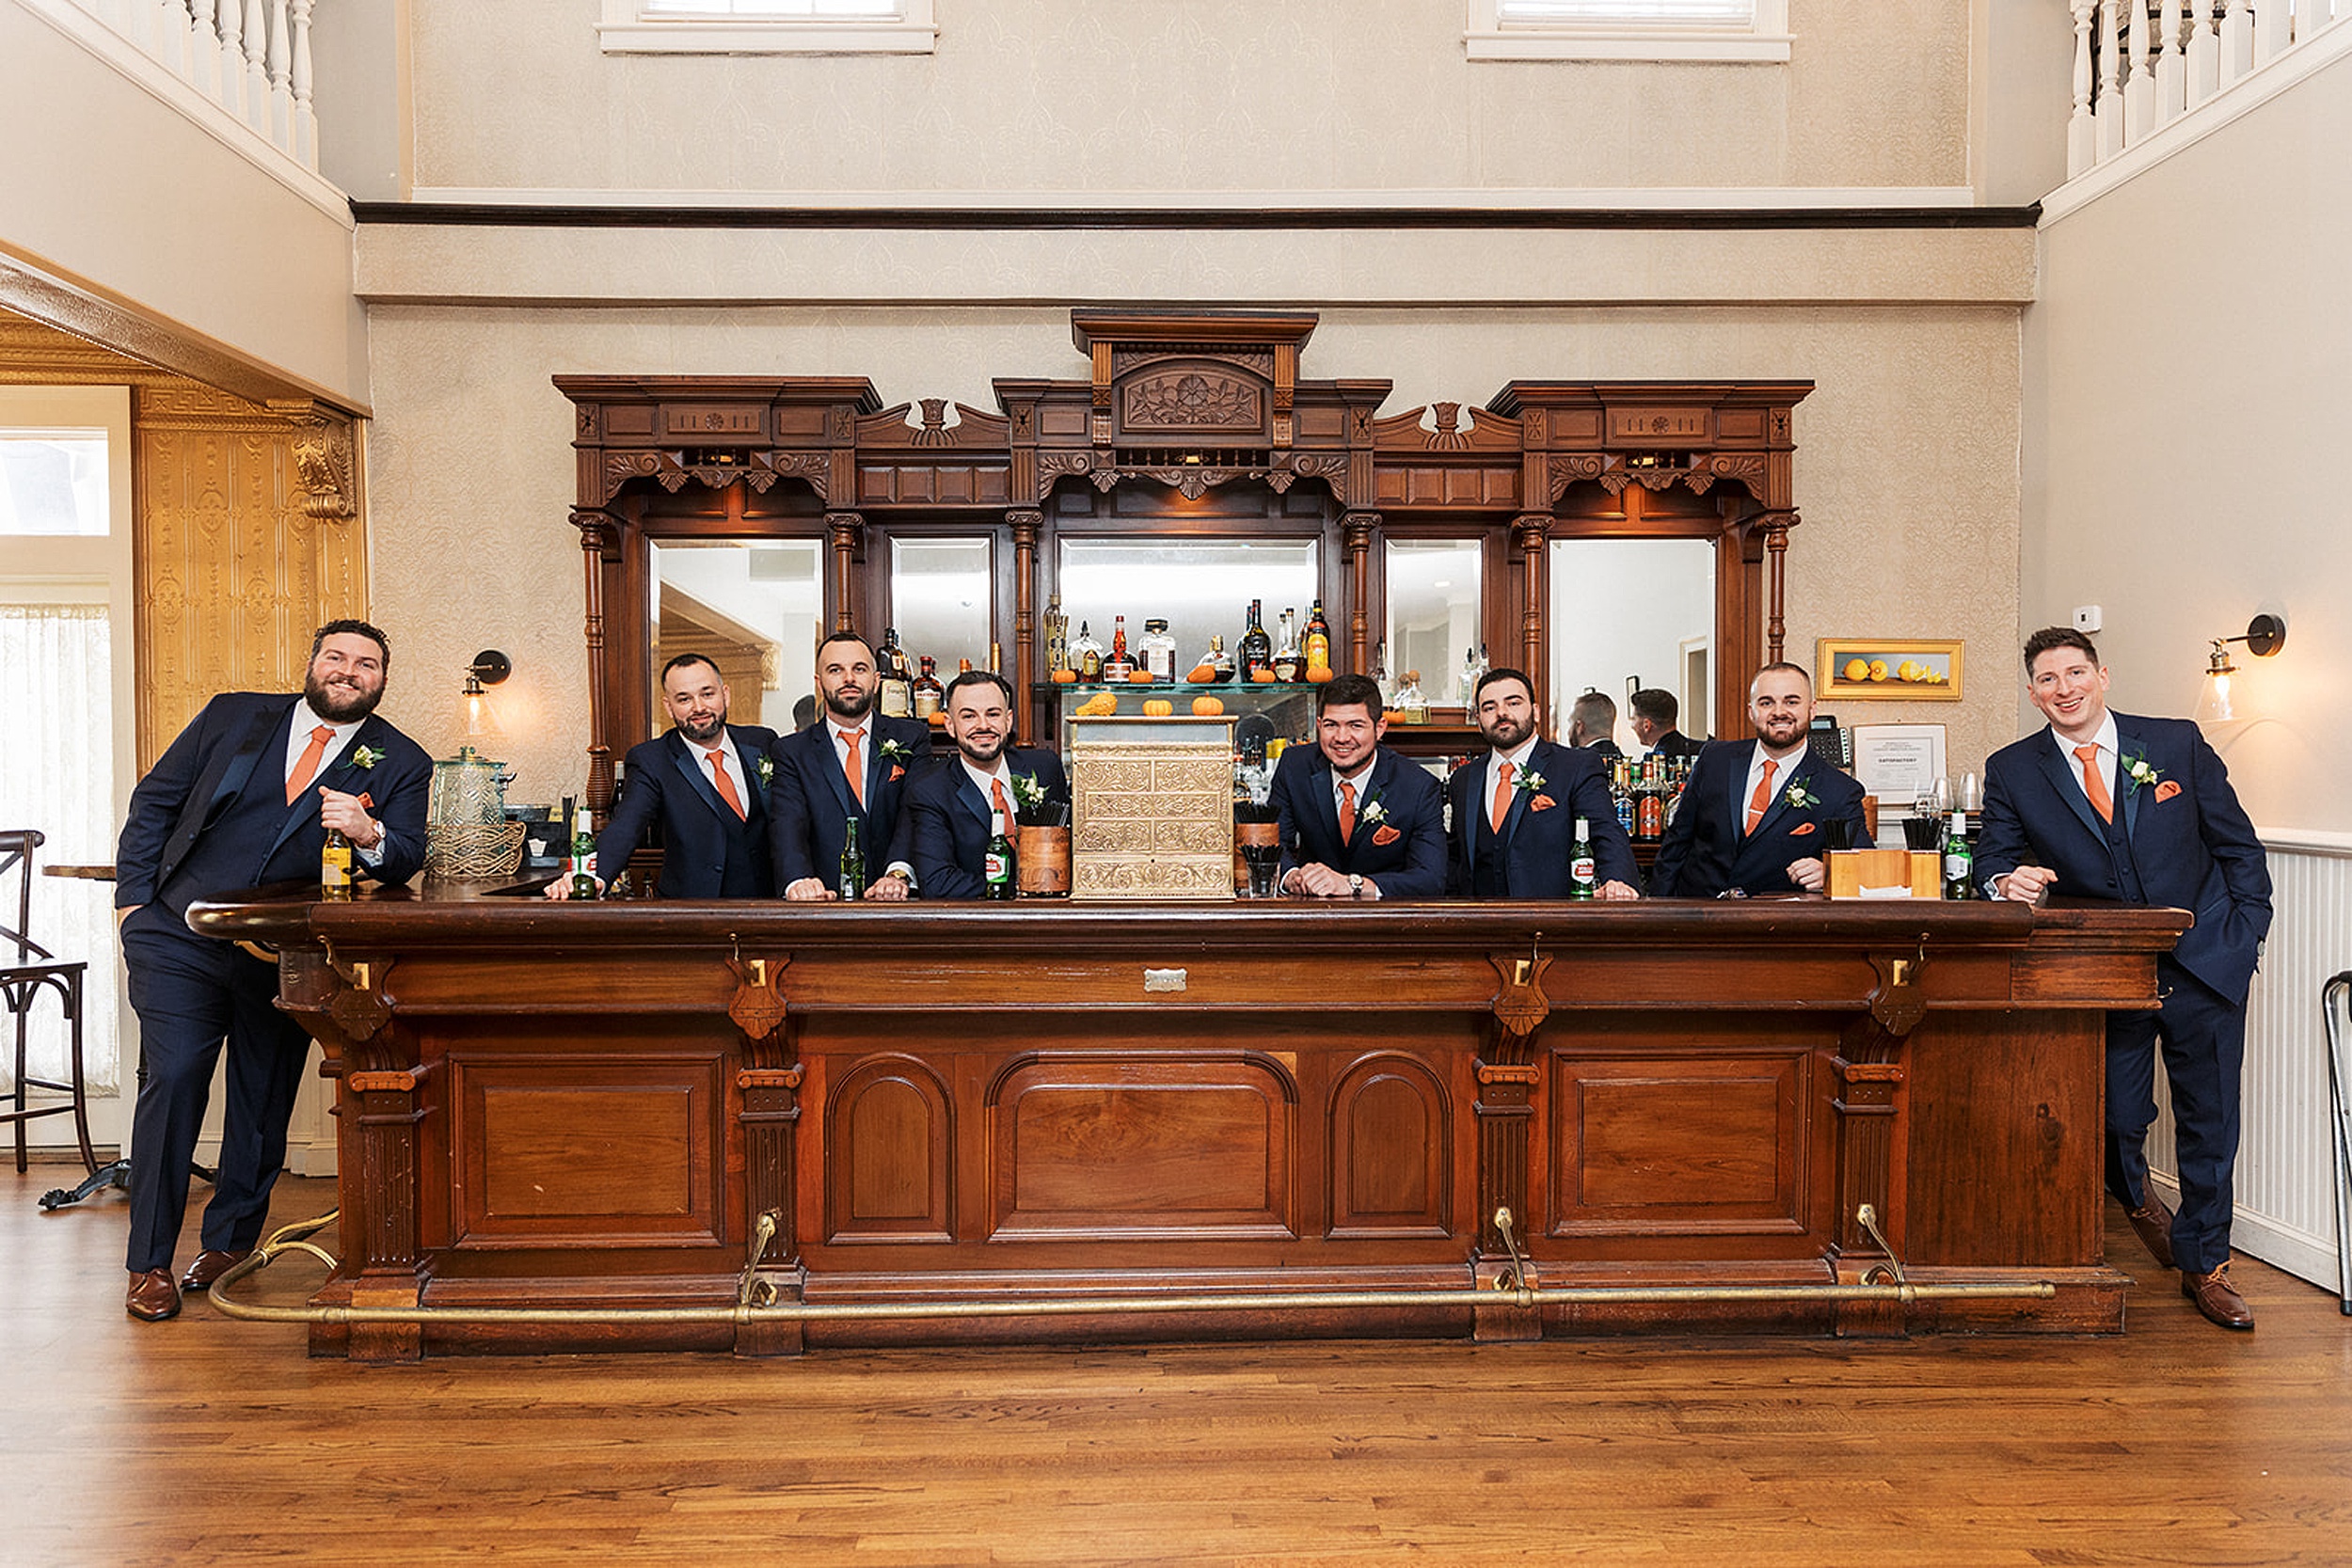 A groom and his groomsmen lean on an antique bar together at a David's country inn wedding